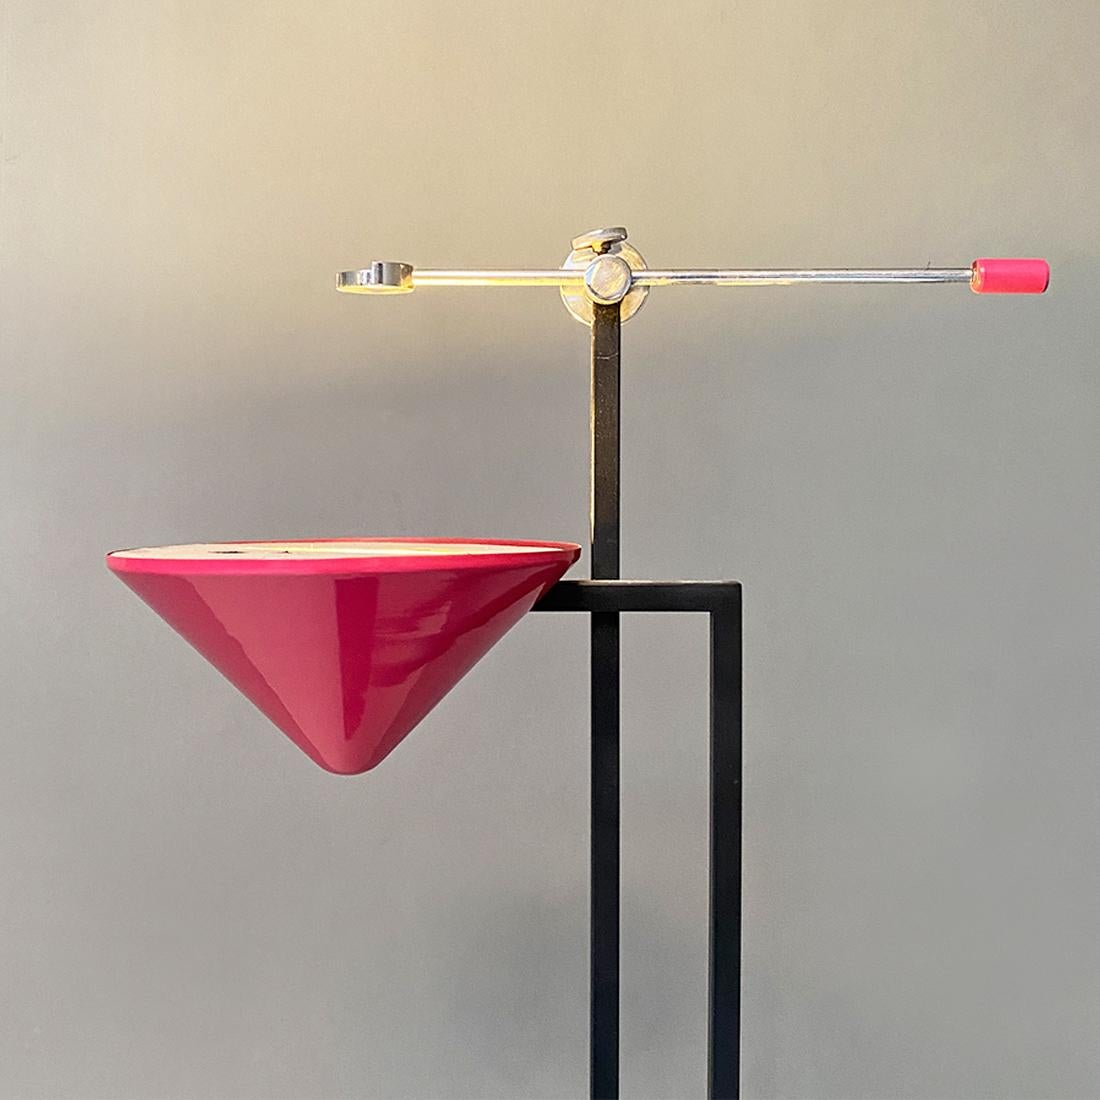 Italian Modern Metal Structure and Magenta Conical Diffuser Floor Lamp, 1980s For Sale 4